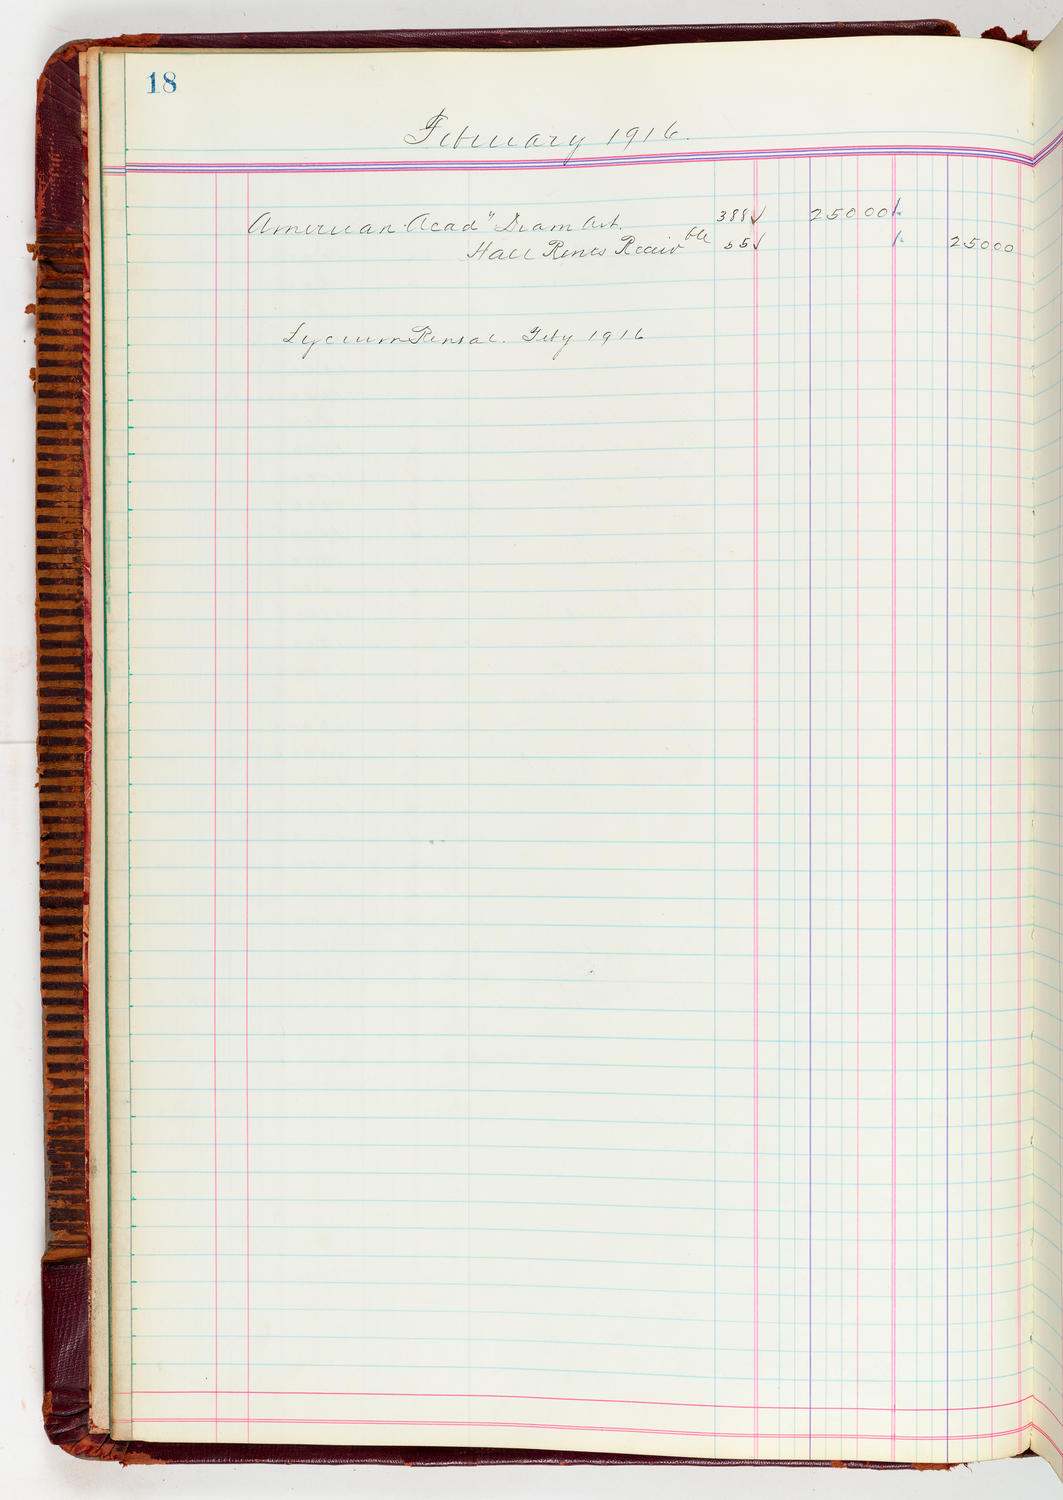 Music Hall Accounting Ledger, volume 5, page 18